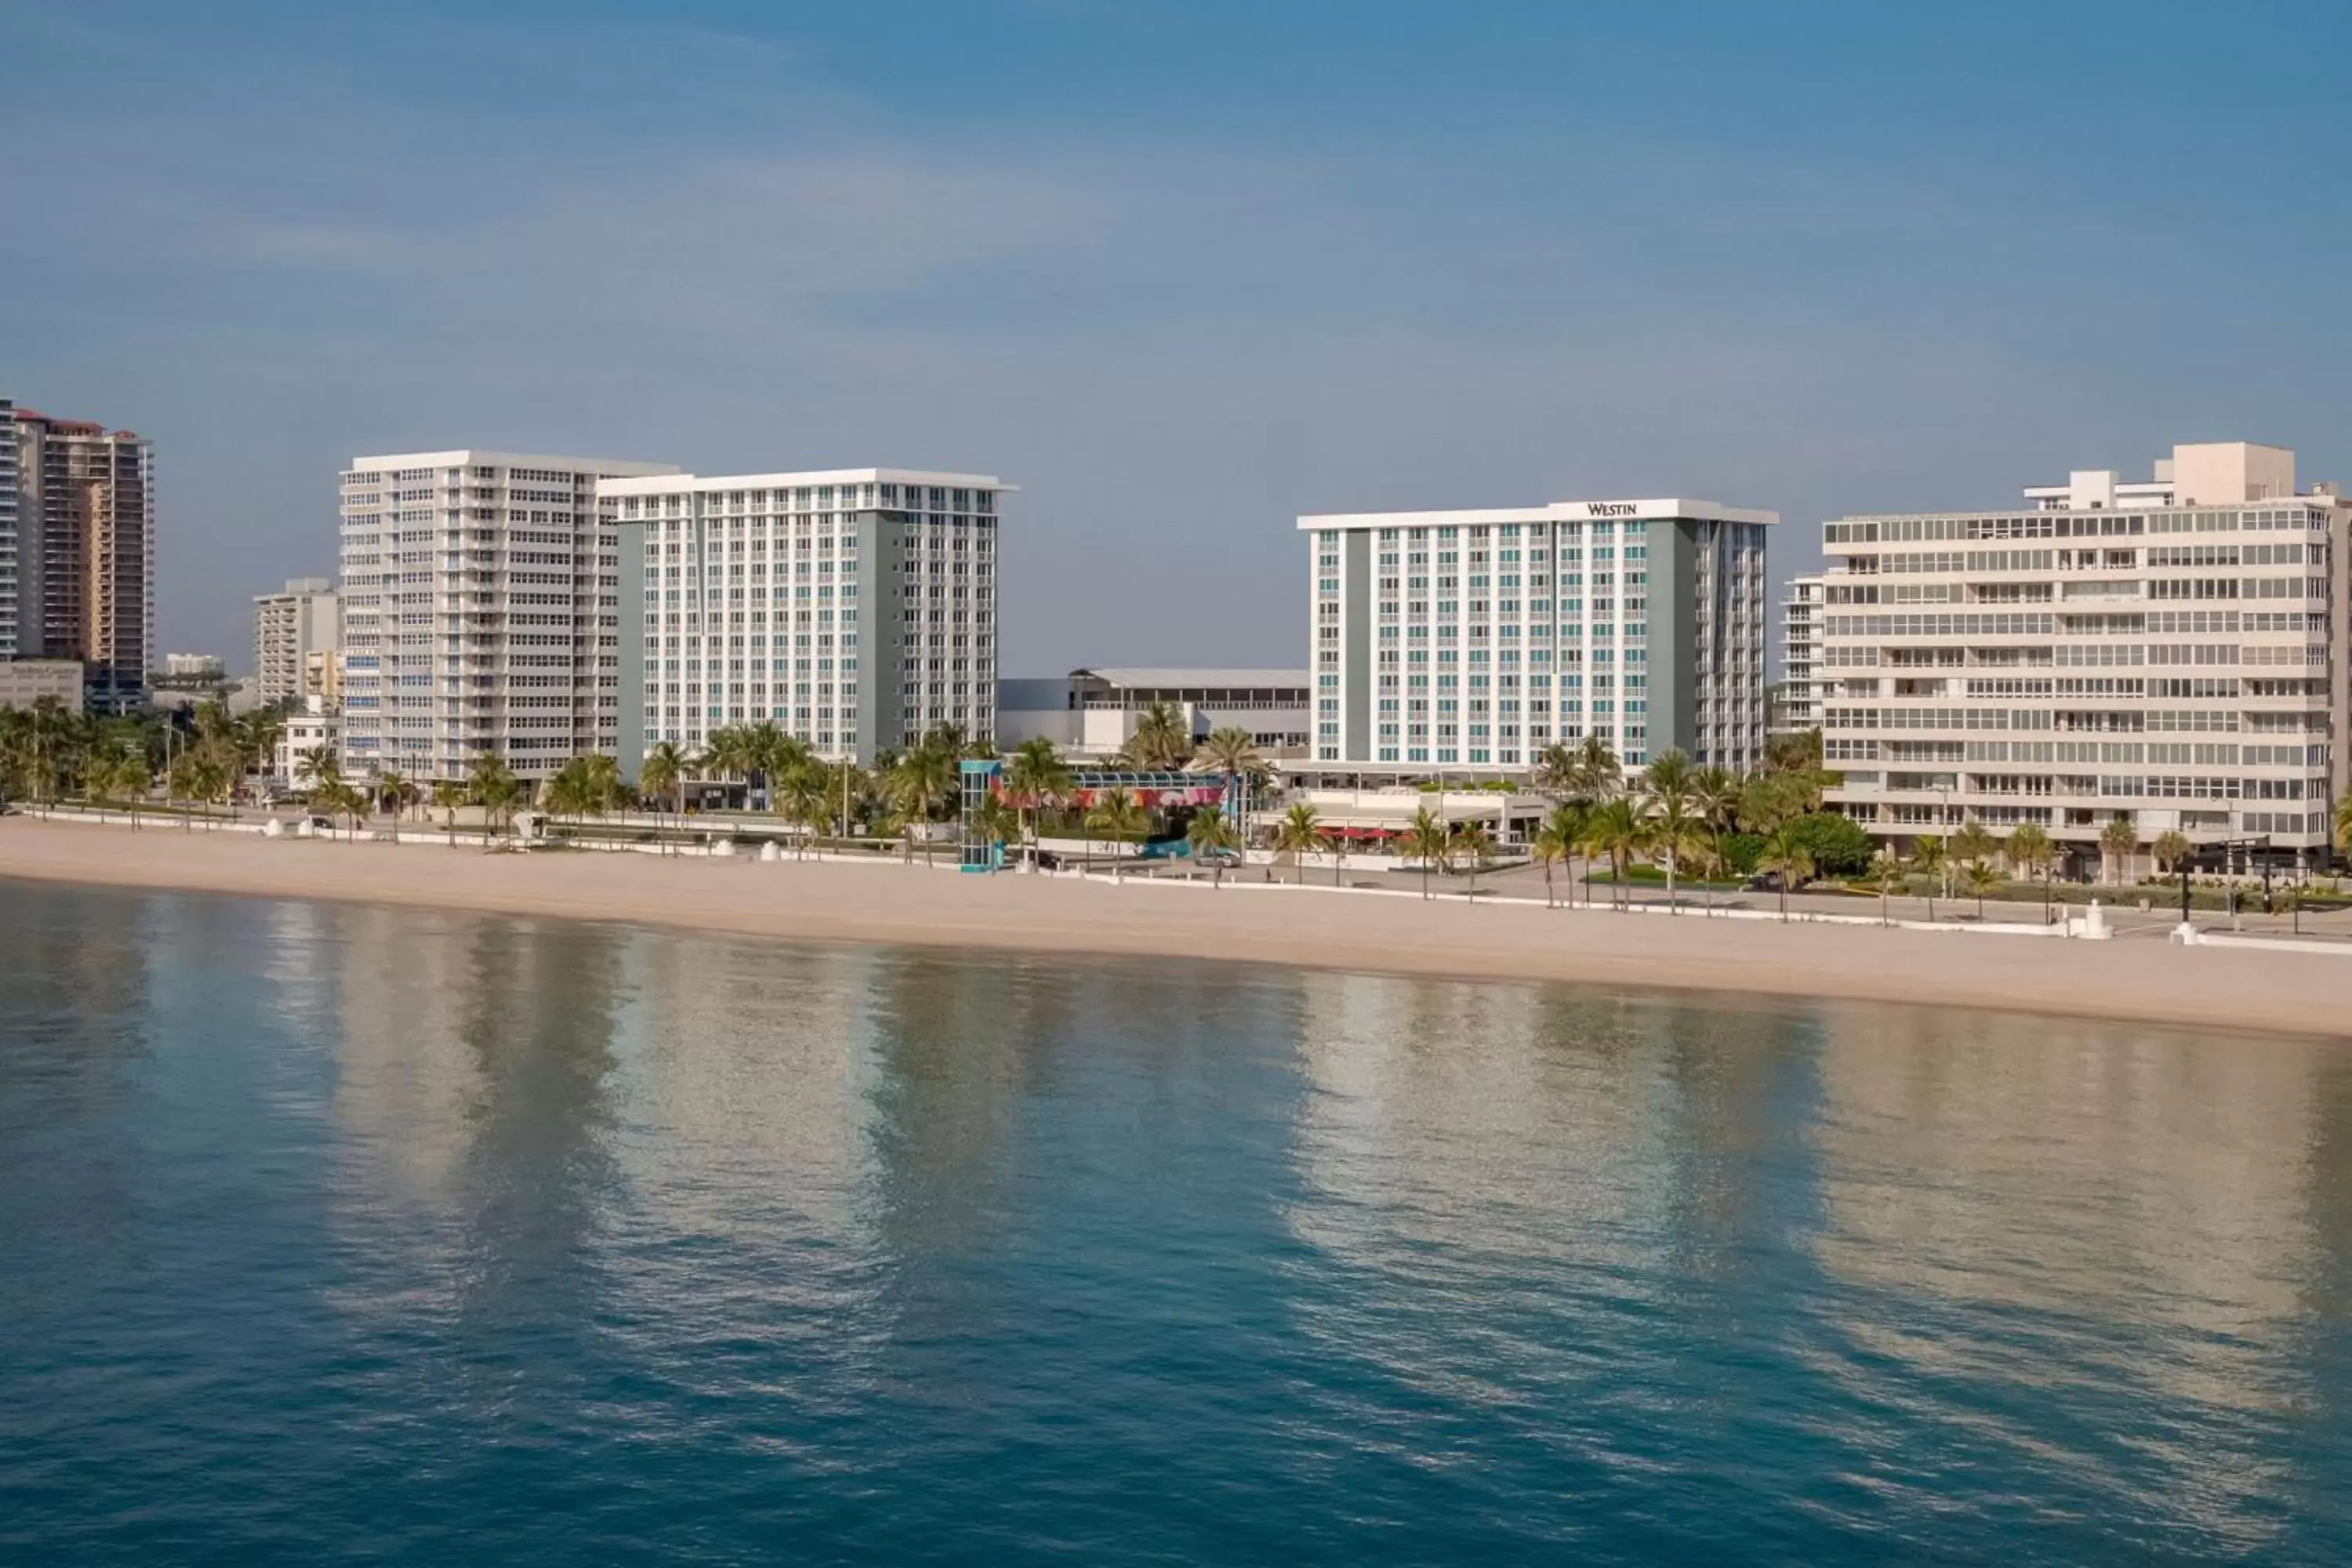 Property building in The Westin Fort Lauderdale Beach Resort